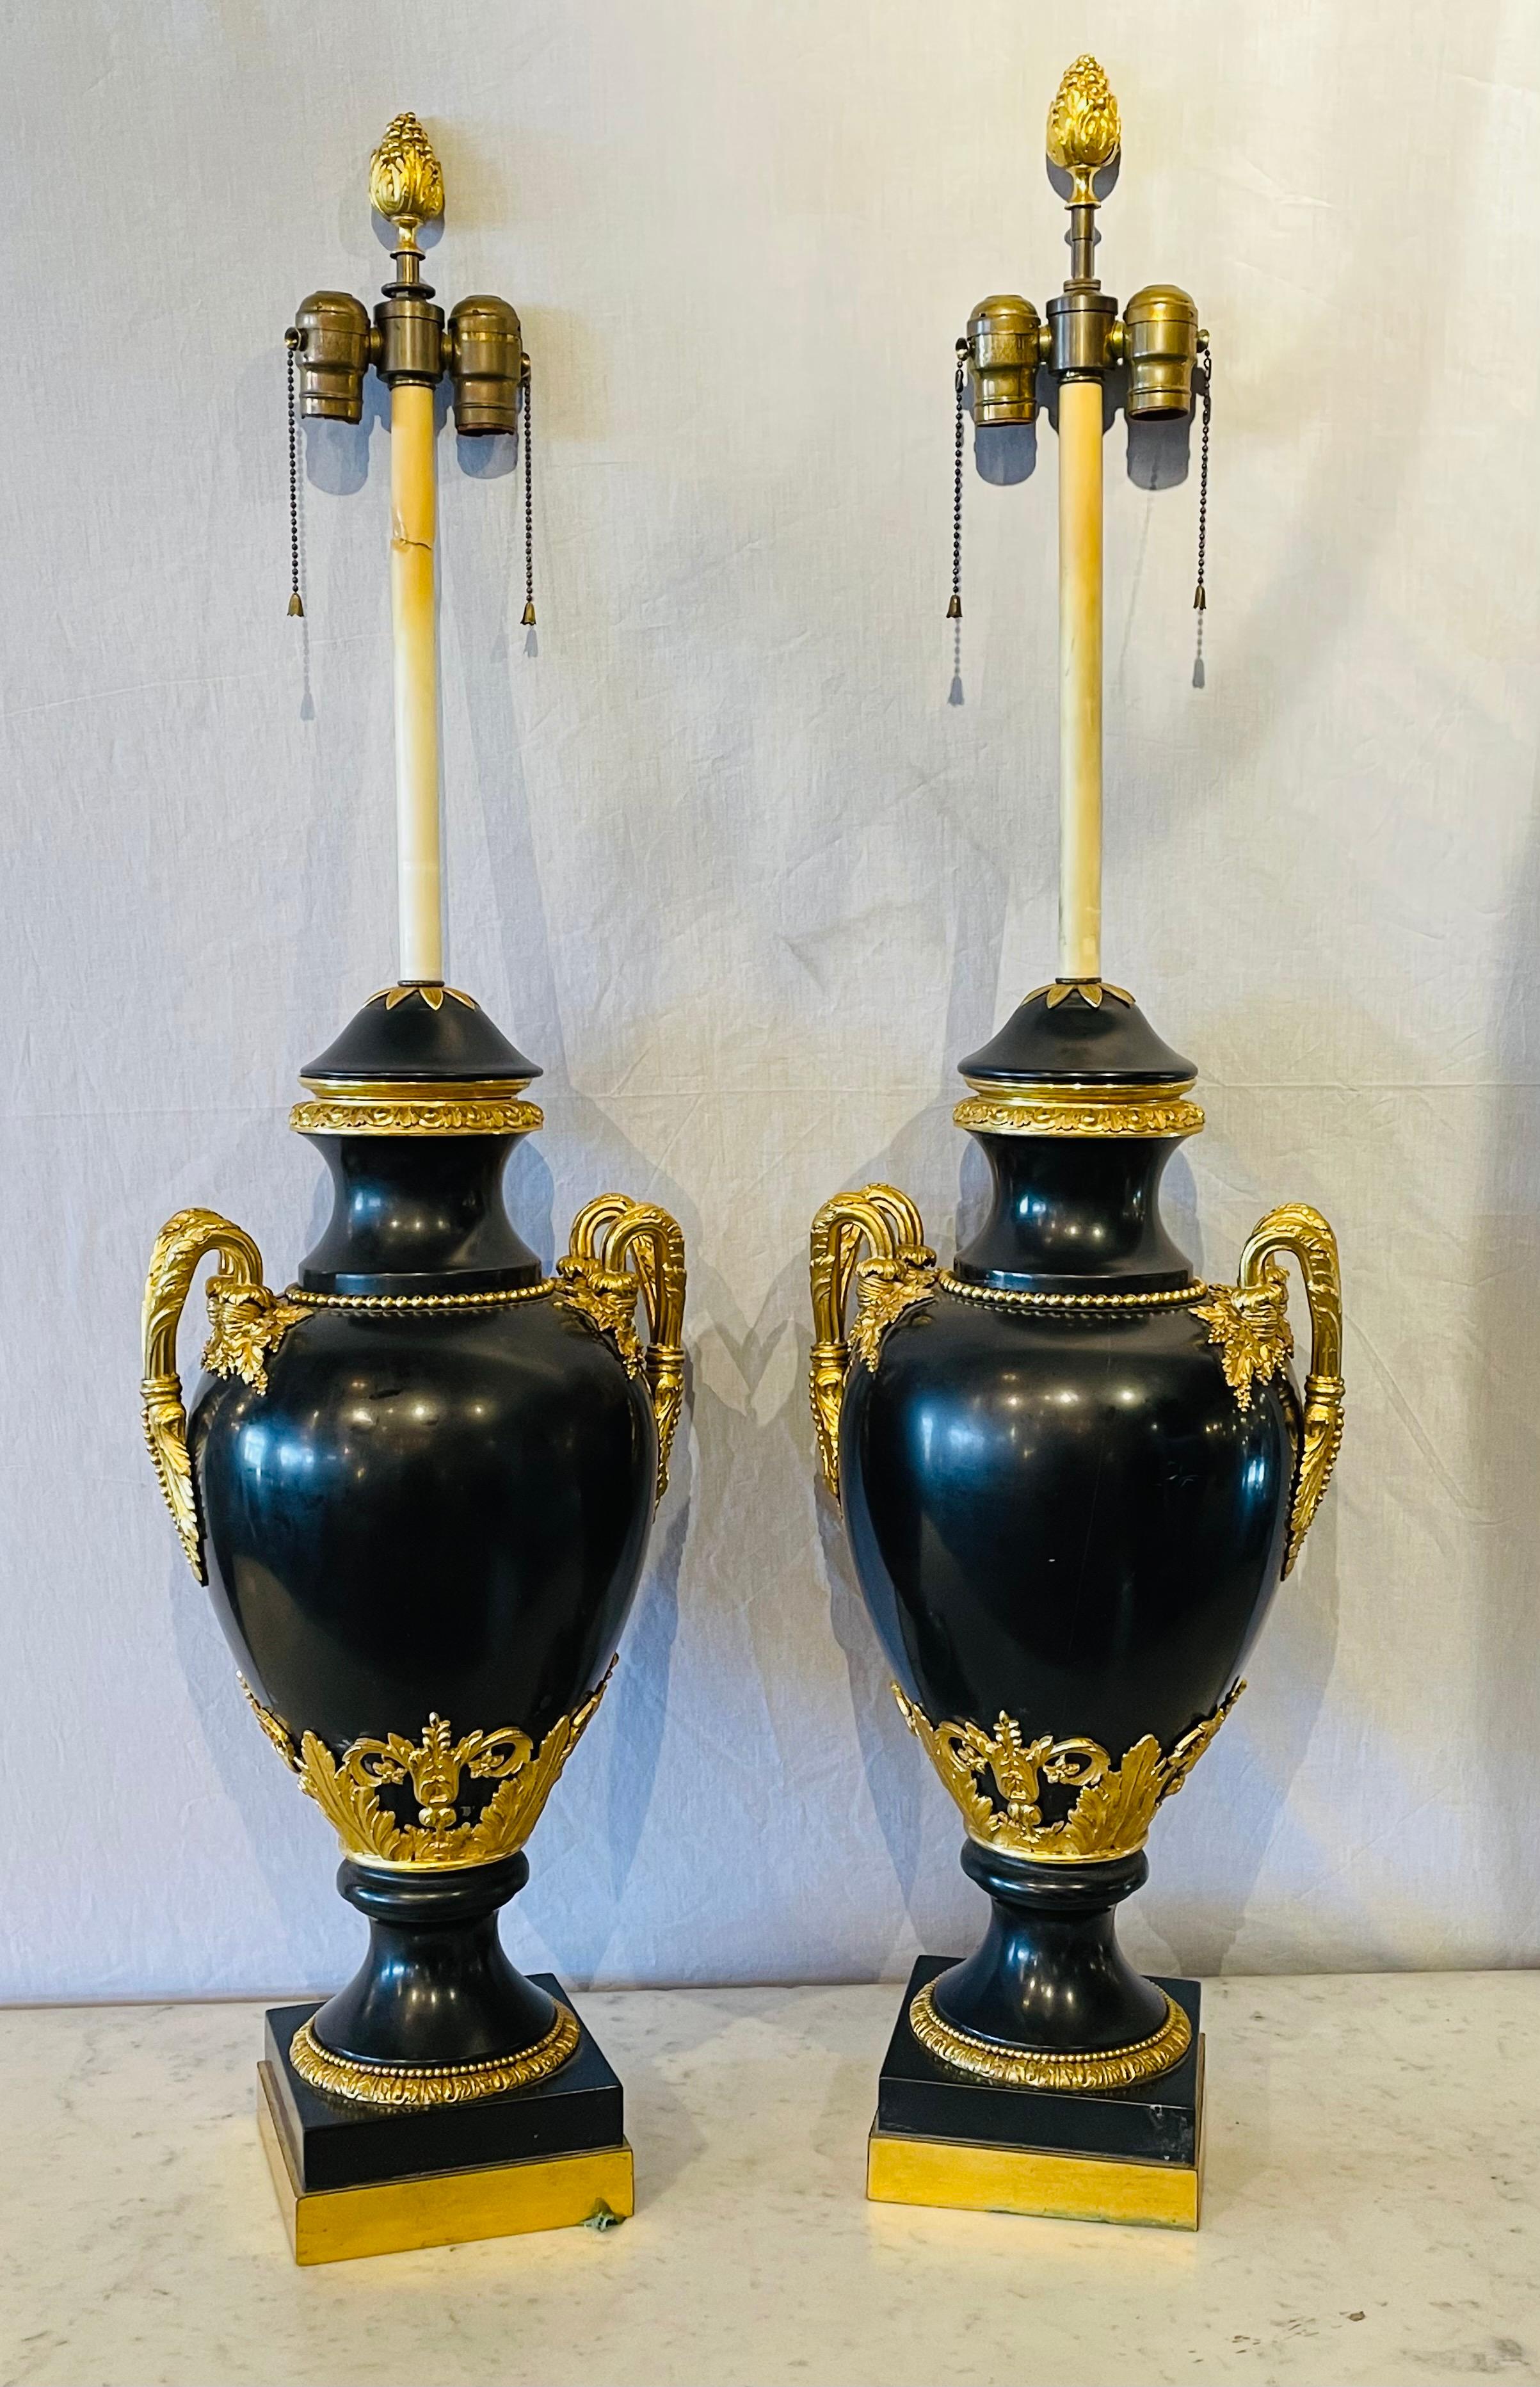 Belle Époque Pair of 19th Century Doré and Black Marble Table Lamps or Urns